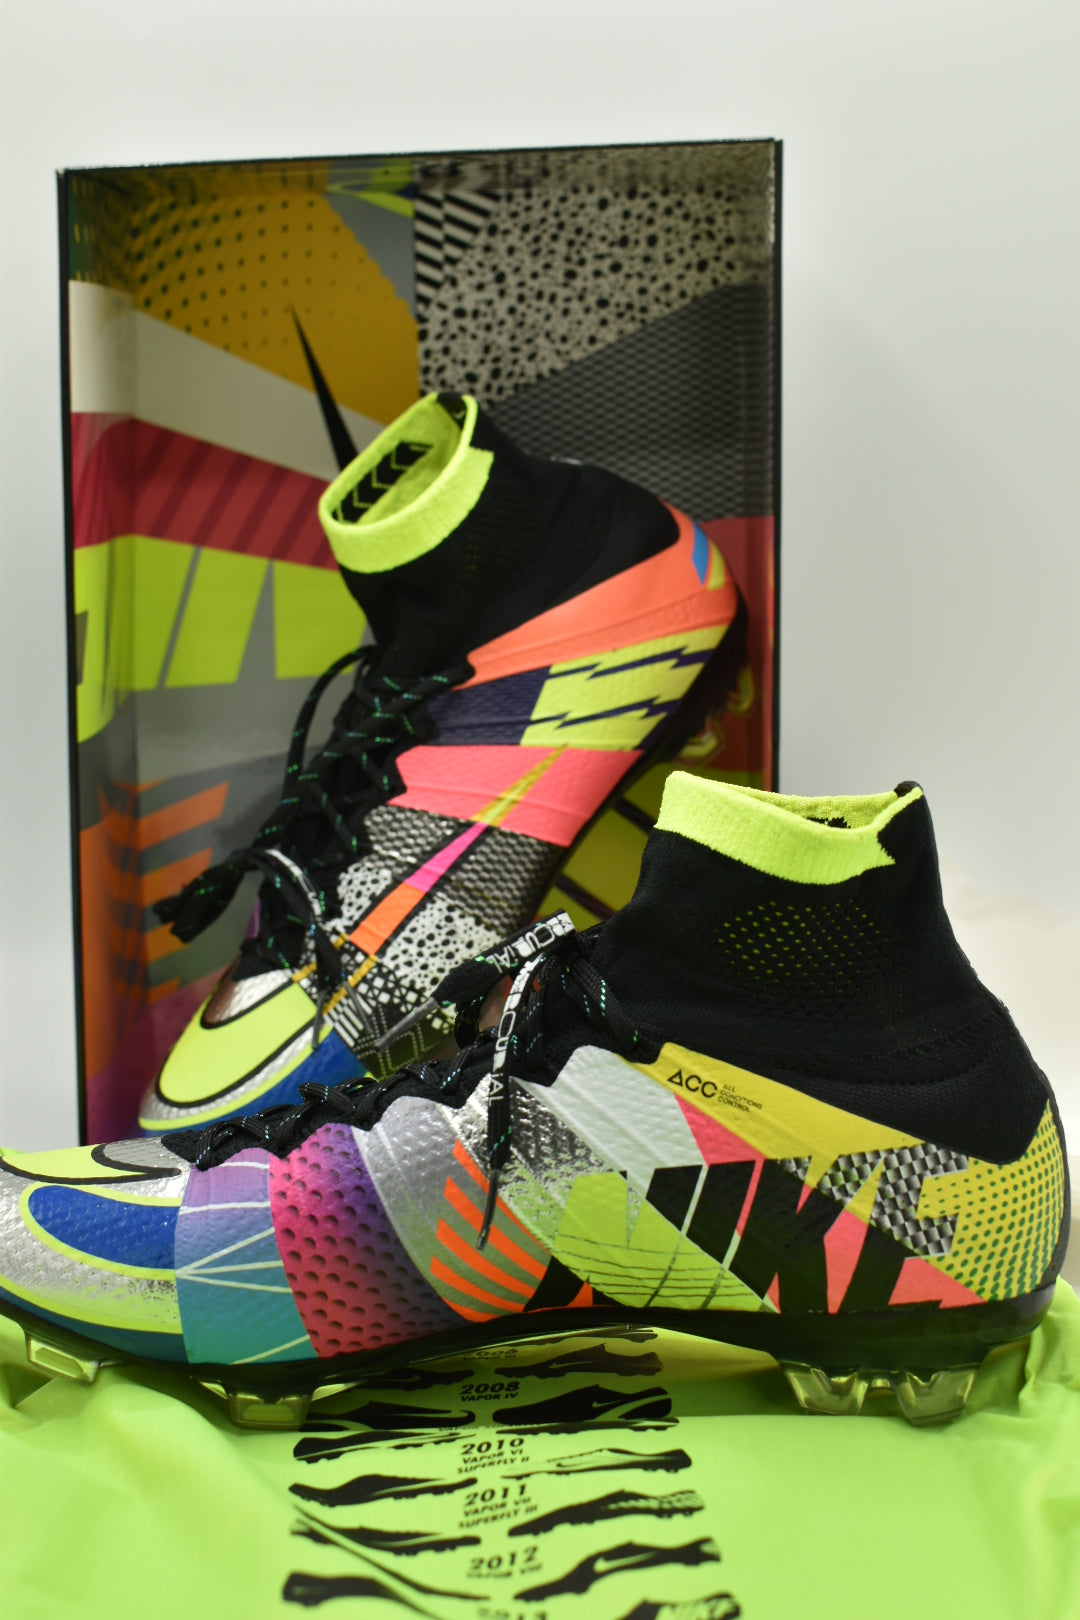 NIKE SUPERFLY IV 'WHAT THE MERCURIAL' 835363-007 – Dutch Boot Collector (DBC)